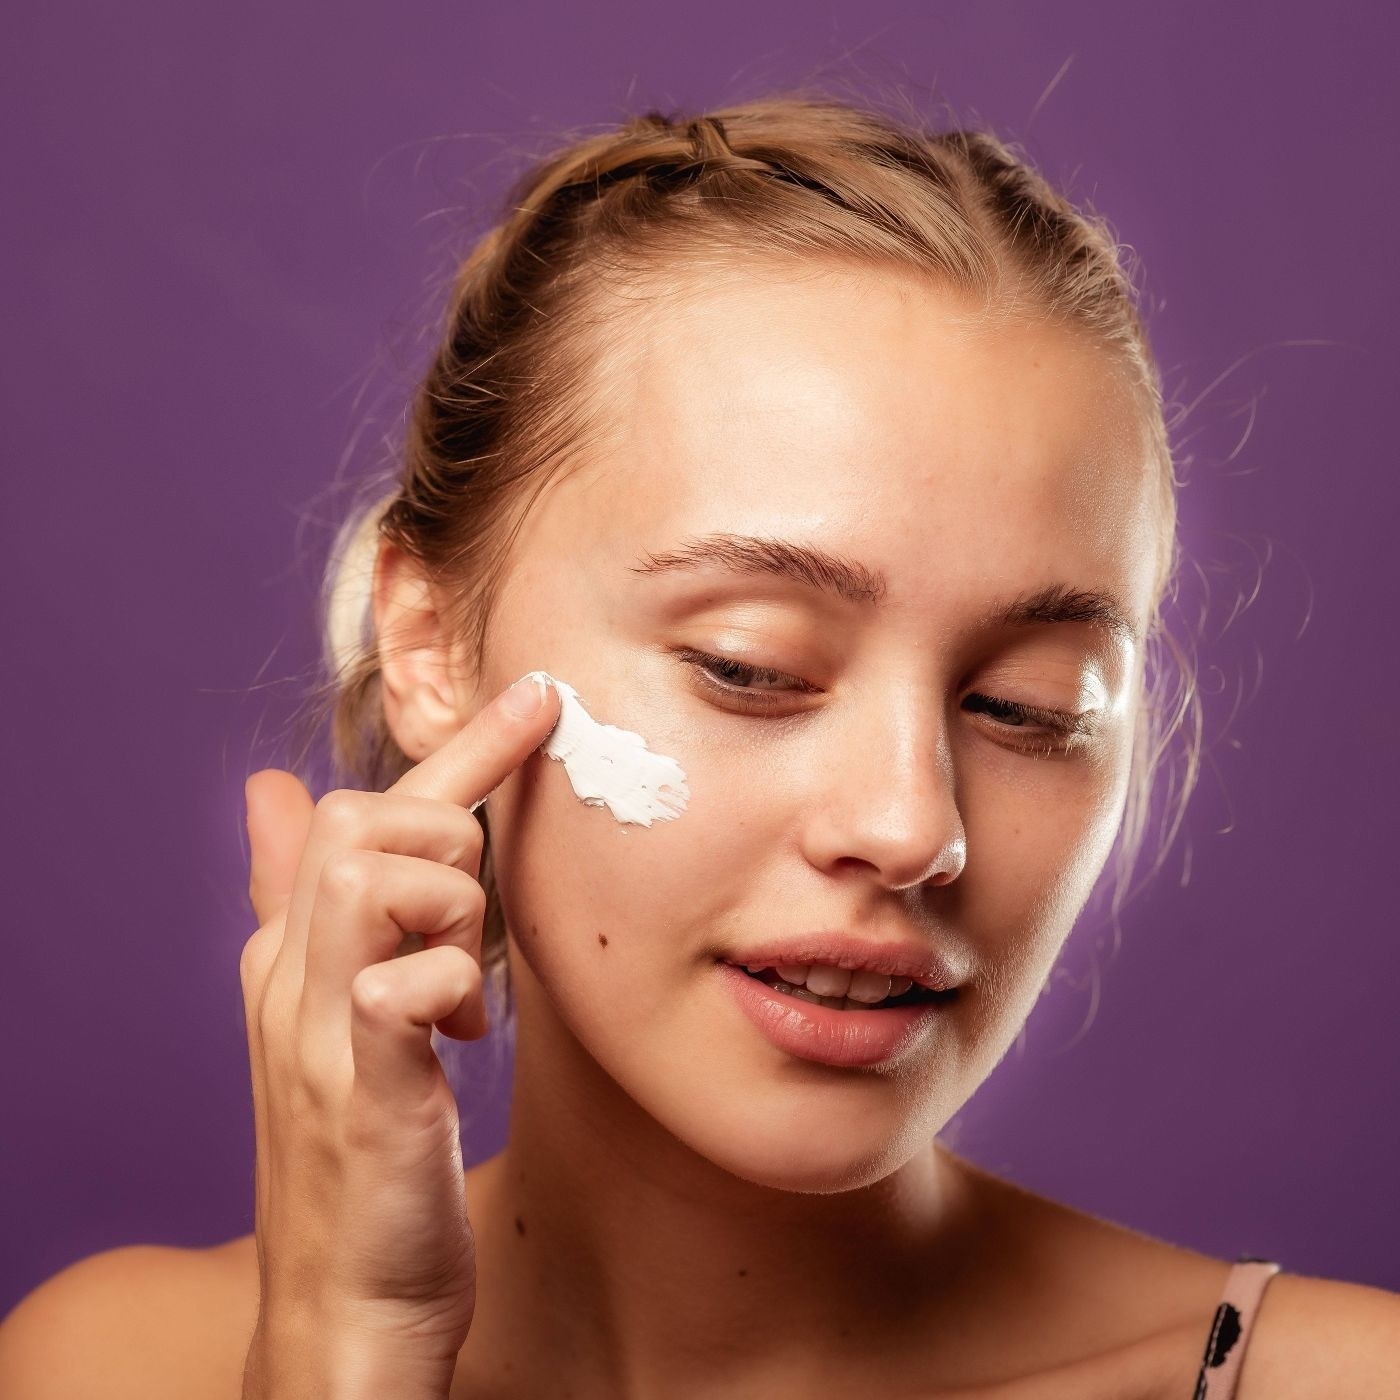 Model using the relaxing lavender mud mask